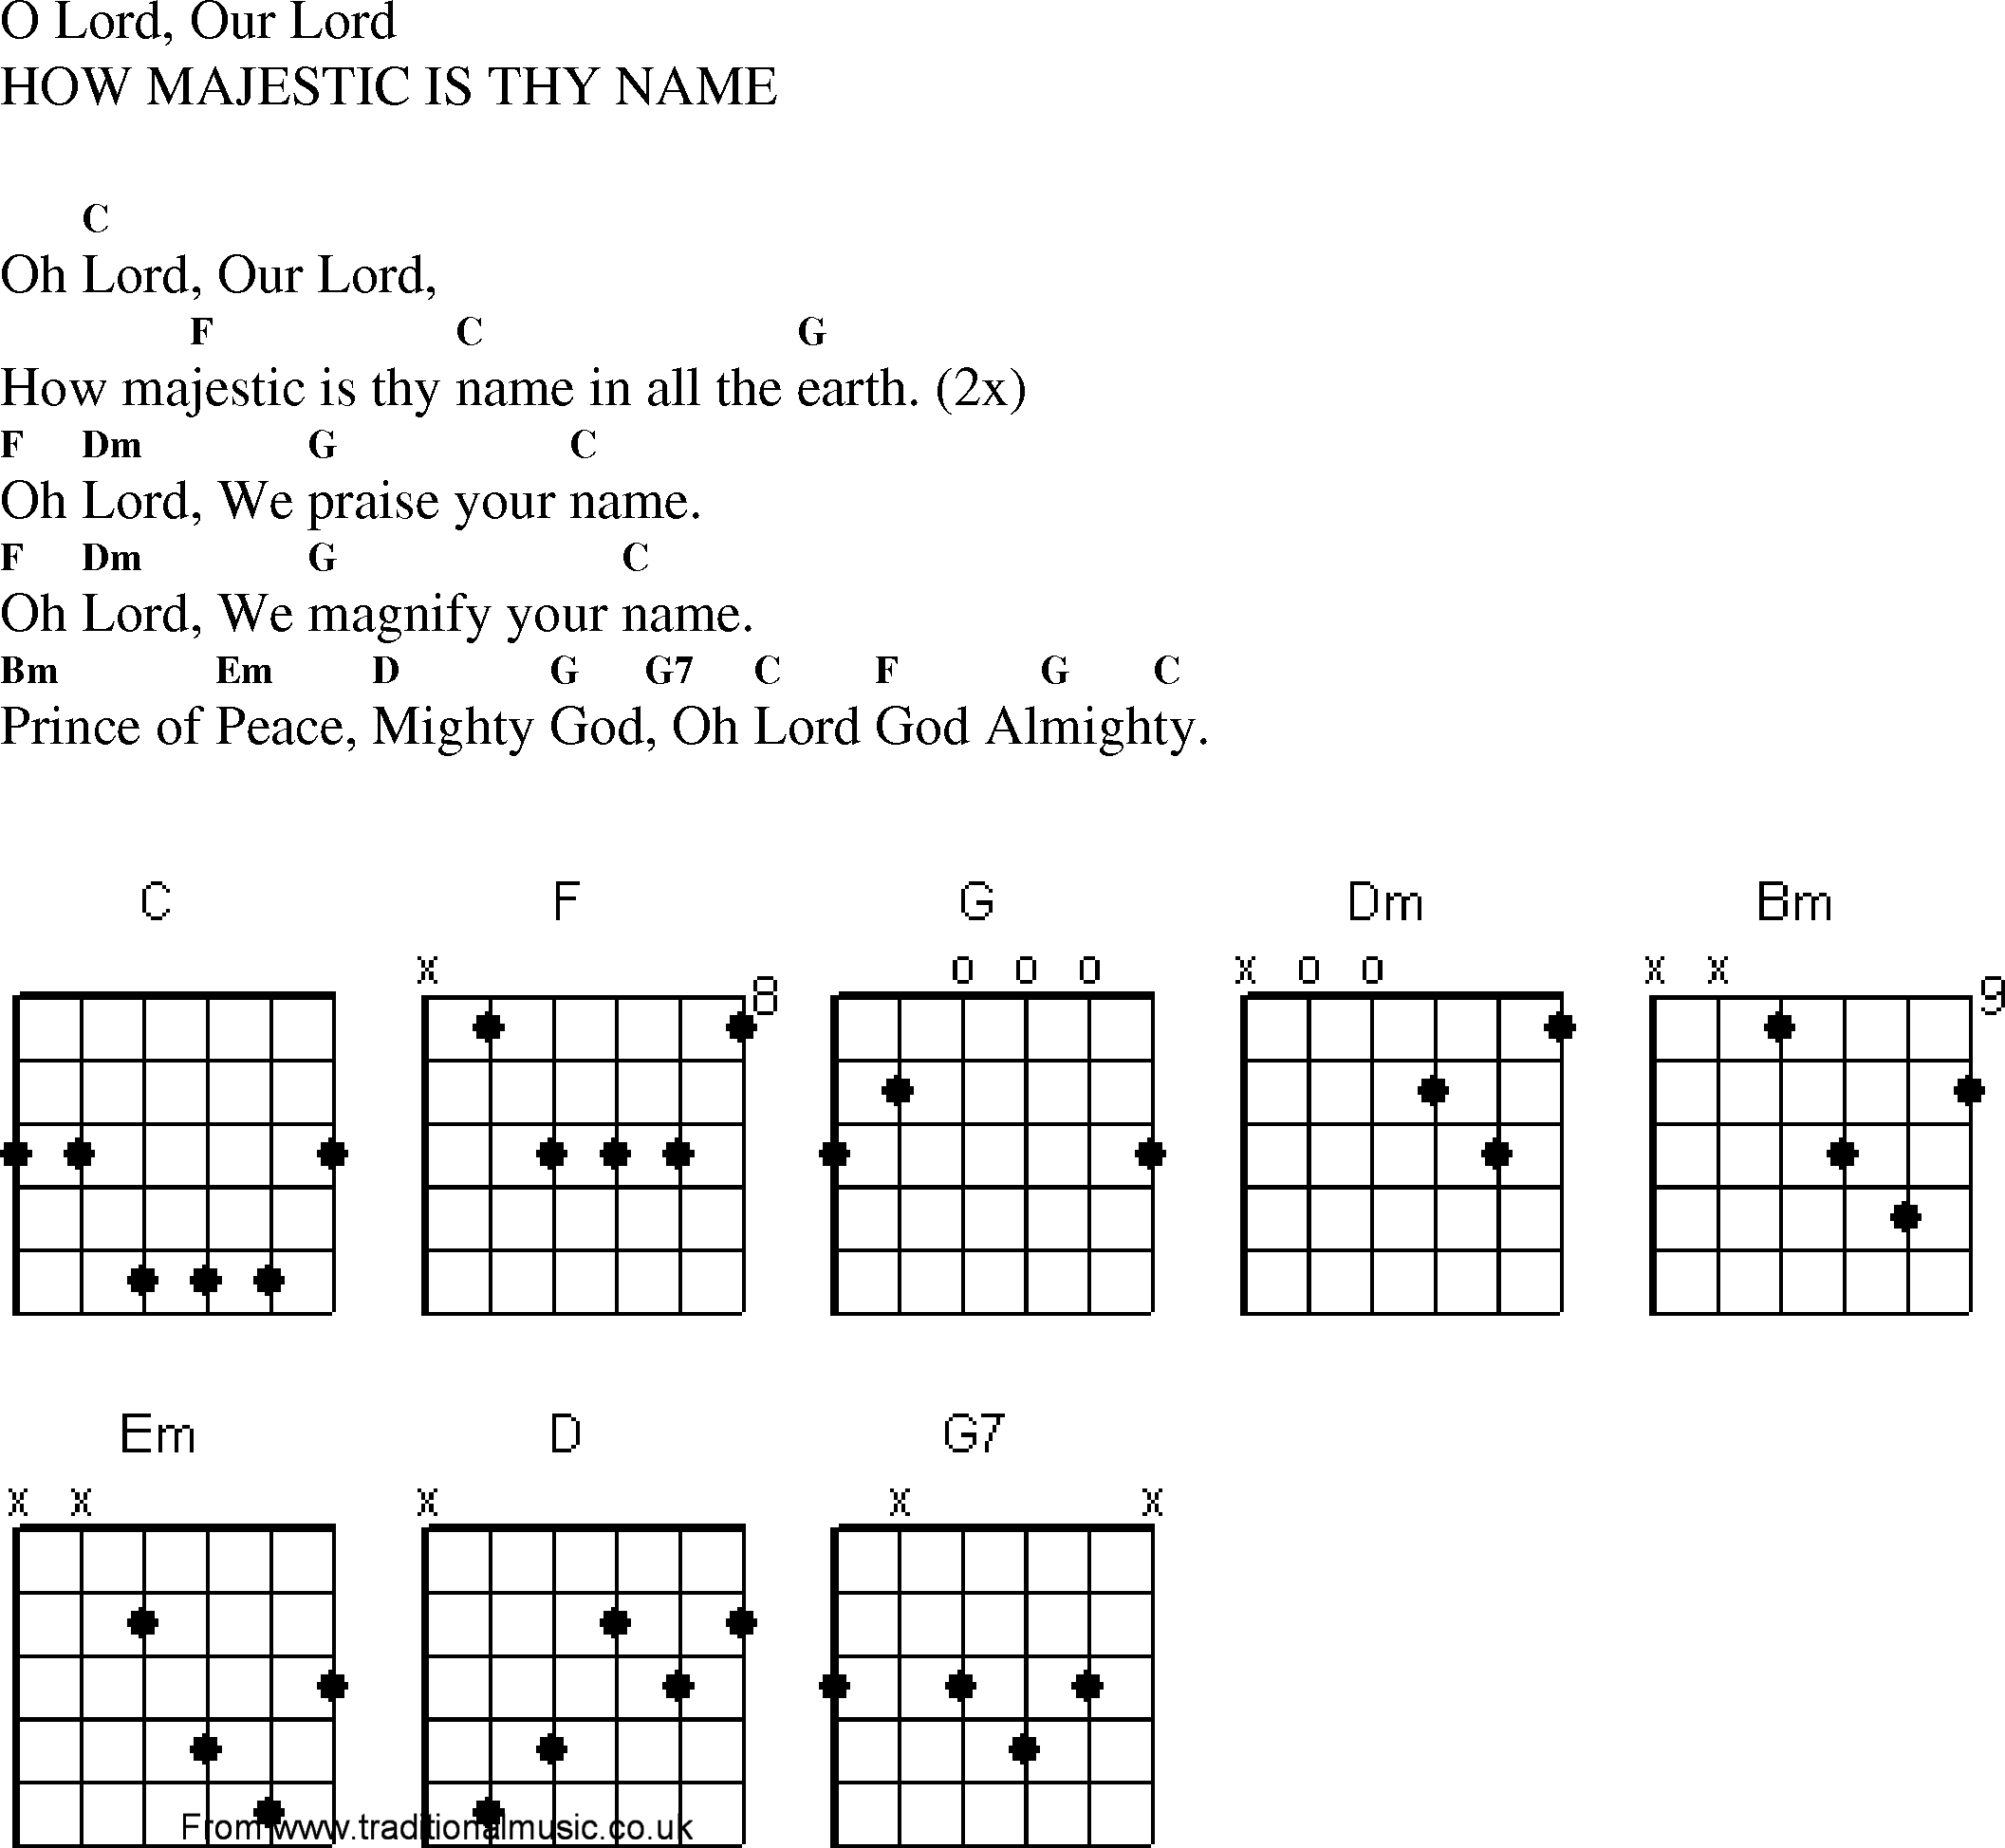 Gospel Song: how_majestic_is_thy_name, lyrics and chords.